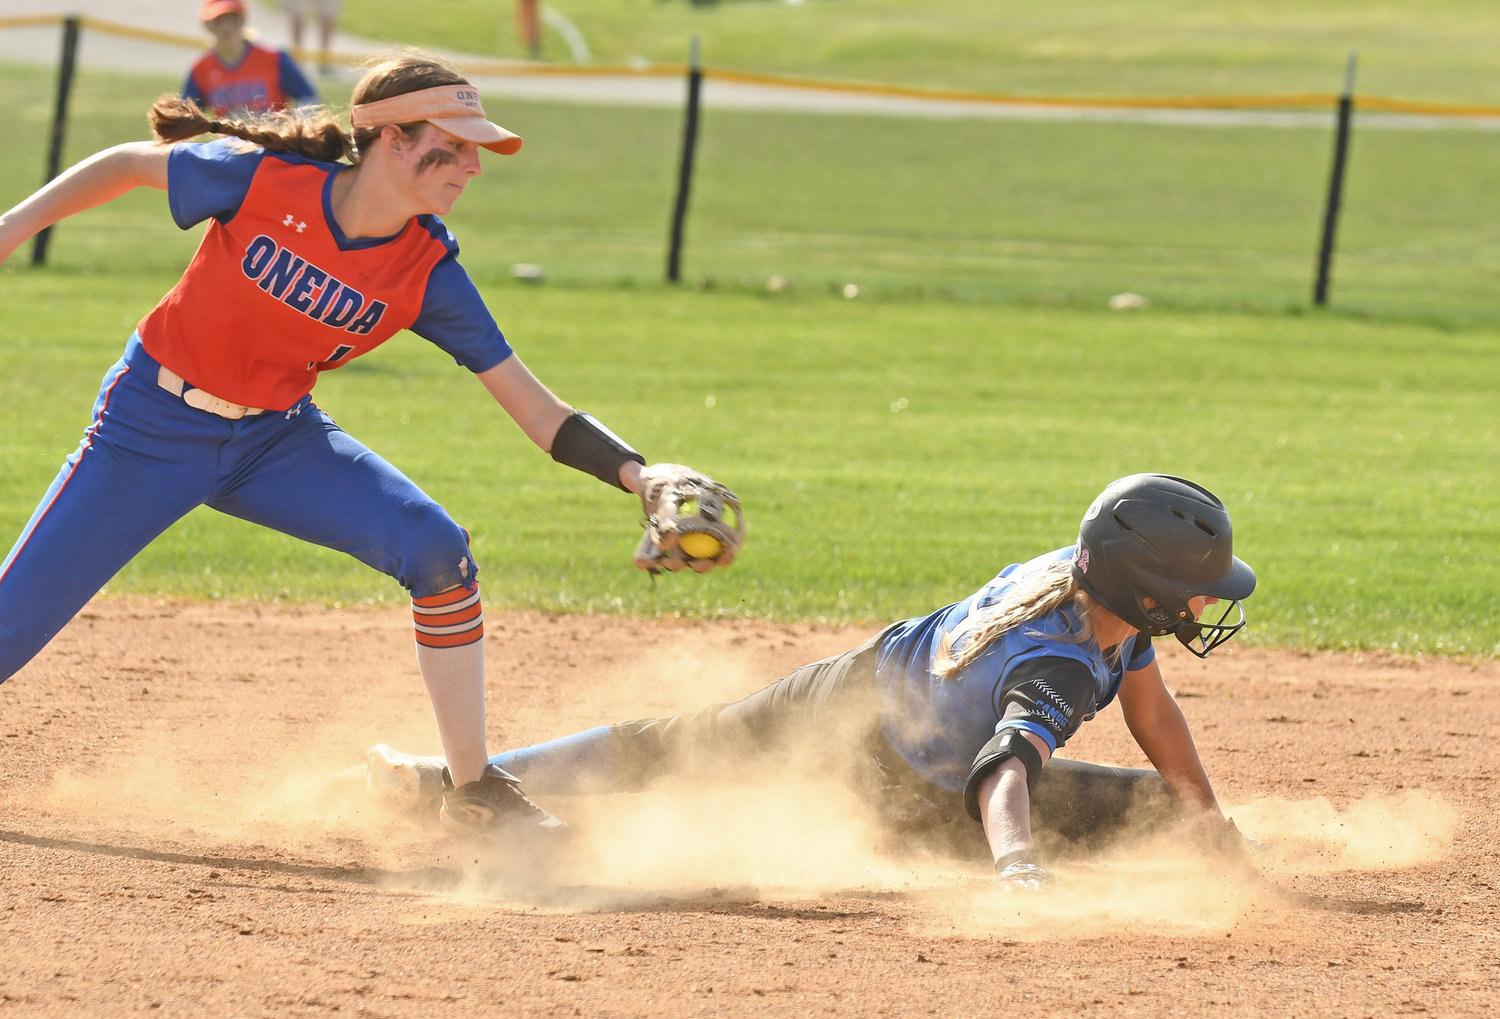 SAFE AT SECOND — Oneida shortstop Kaylin Curro reaches out but can’t quite get the tag on Camden baserunner Jadyn Prievo in the Tri-Valley League matchup at Oneida Monday. The Blue Devils won 9-6.